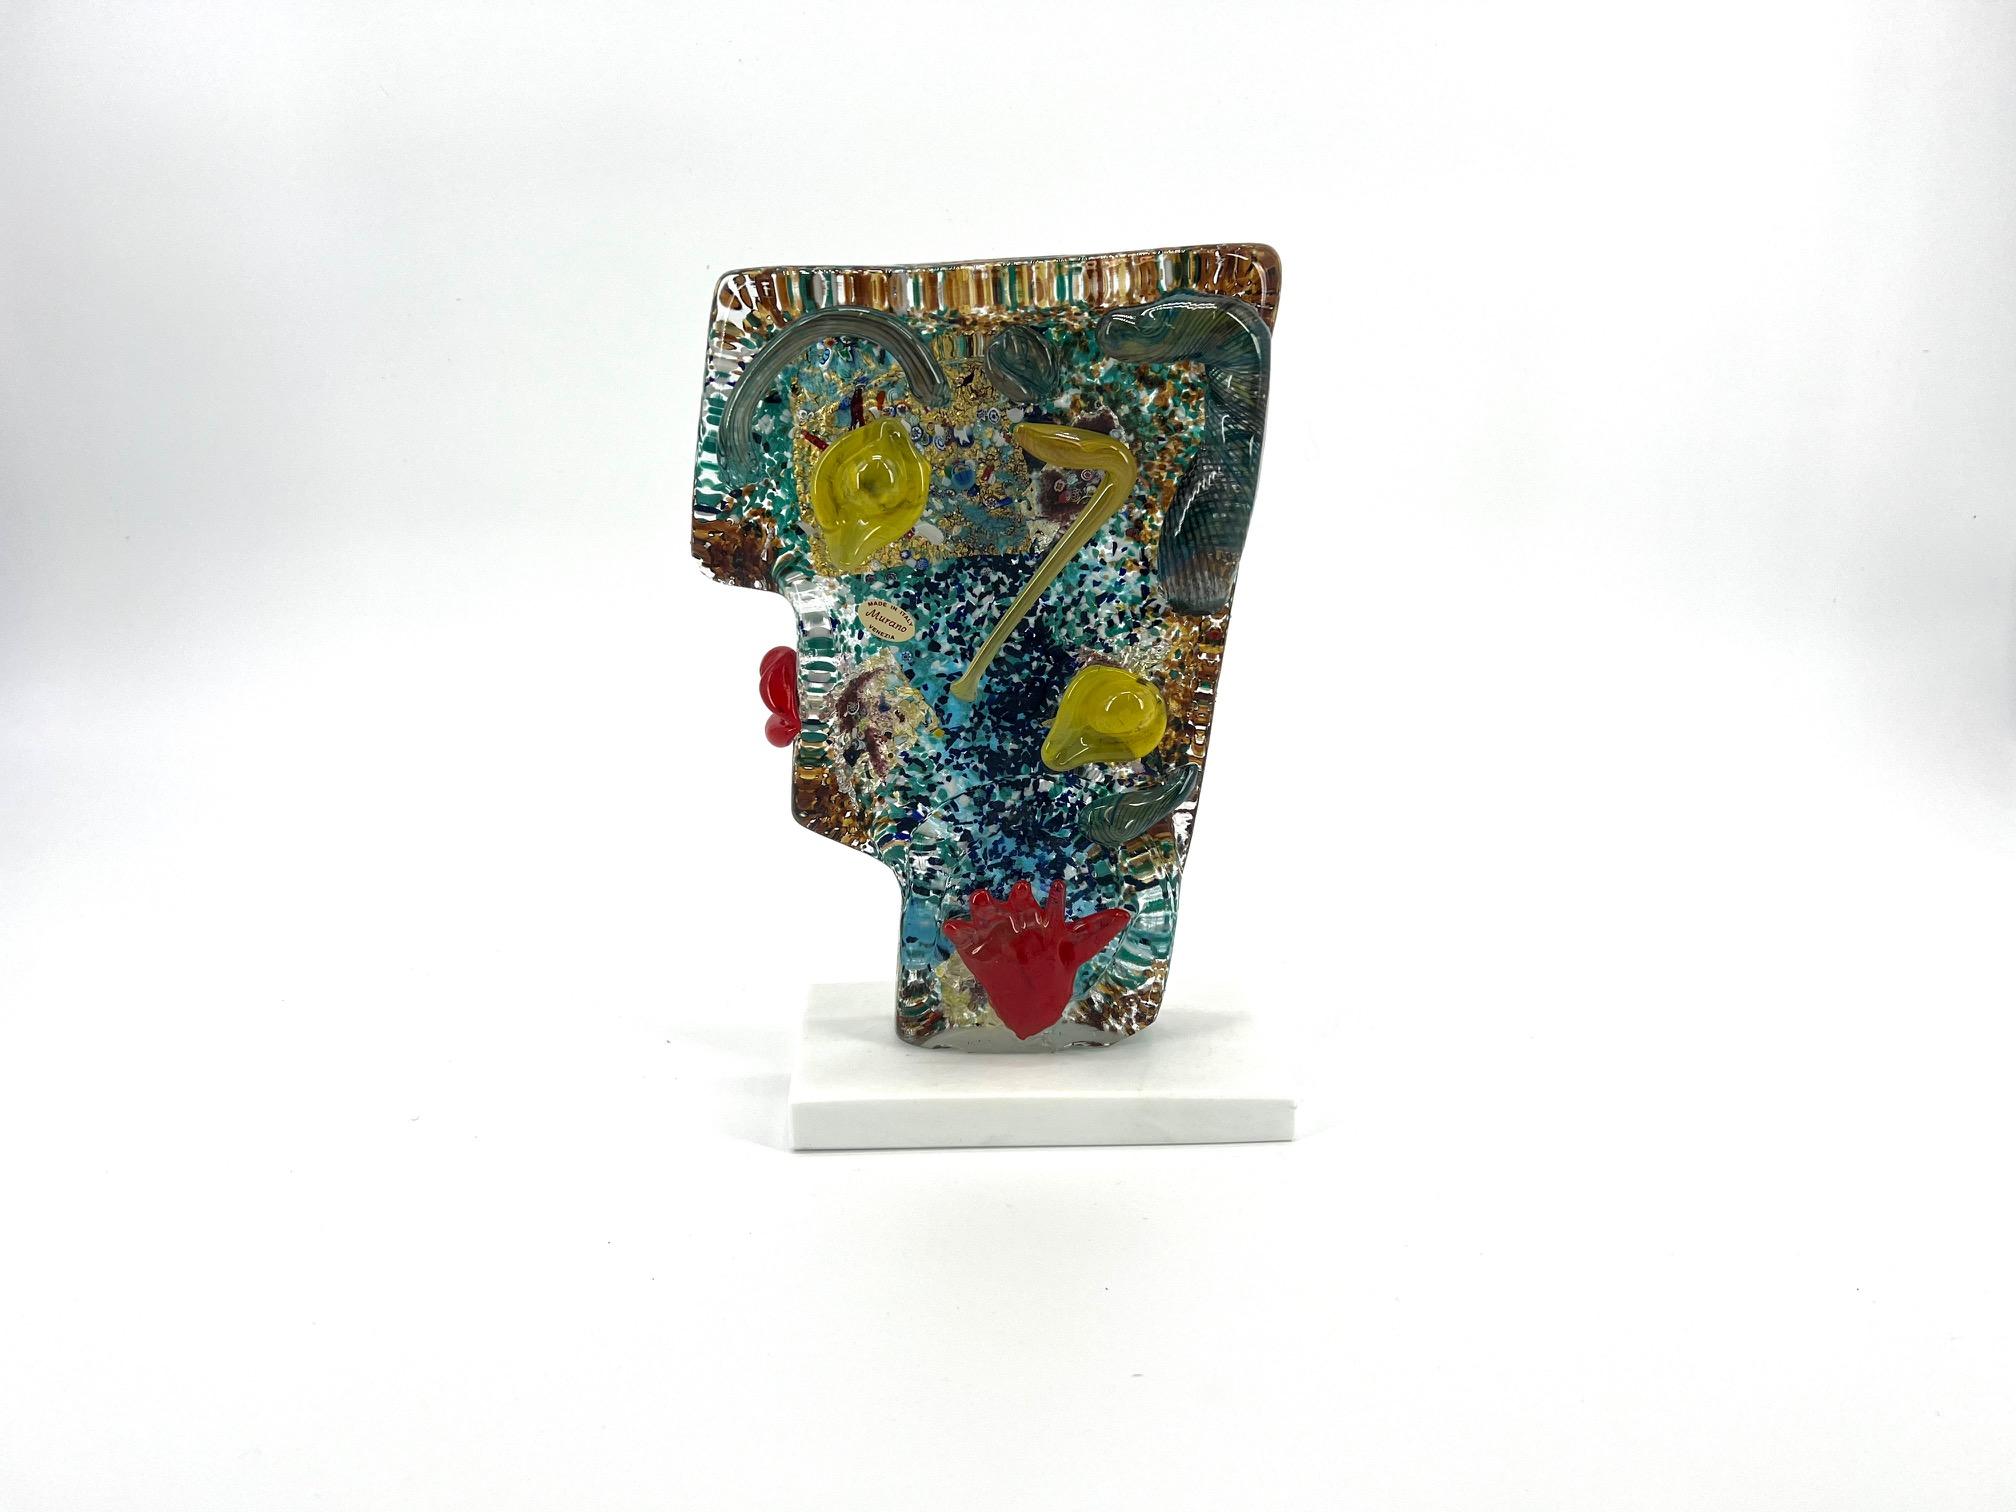 Unique hand made in Murano / Venice glass sculpture, tributed to Cubism and great Pablo Picasso

Hand blown and made by 1295 MURANO in its furnace workshop located in the Murano Island of Venice.
This Sculpture, of nice sizes, it is made with the